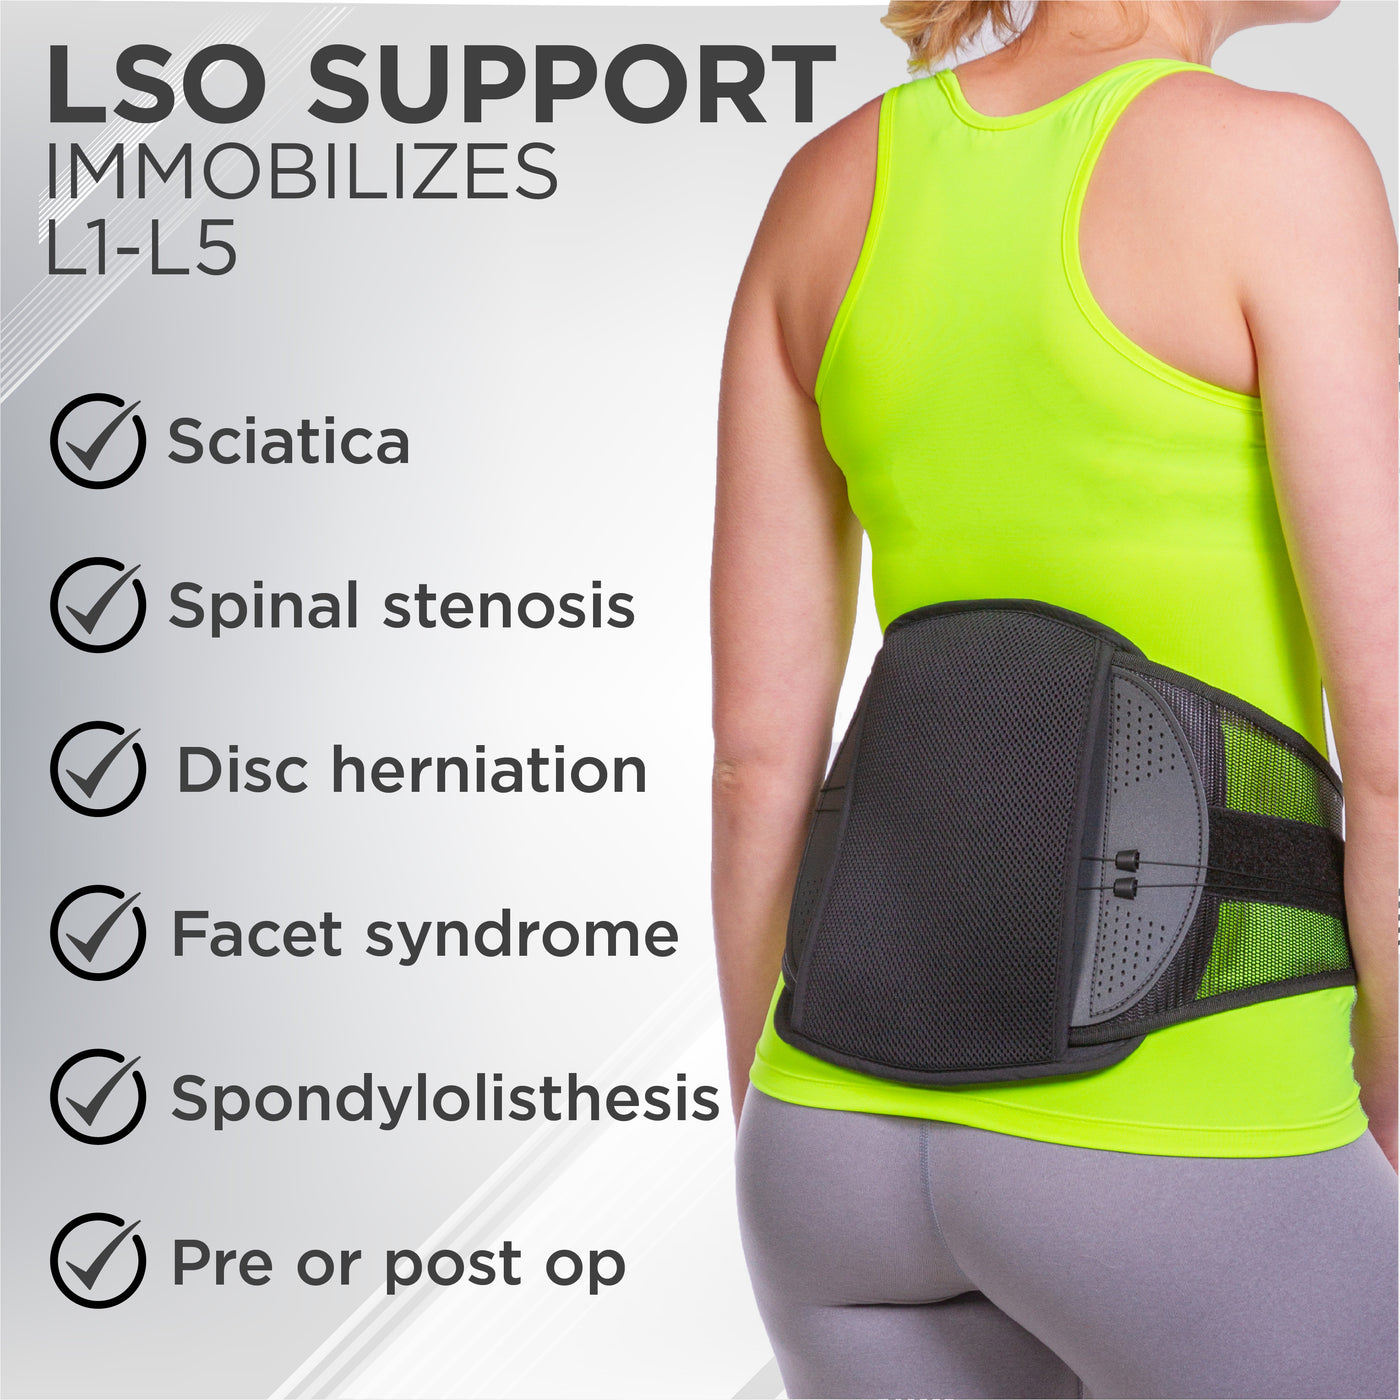 The lso ankylosing spondylolysis support immobilizes l1 to l5 vertebra to relieve spinal stenosis